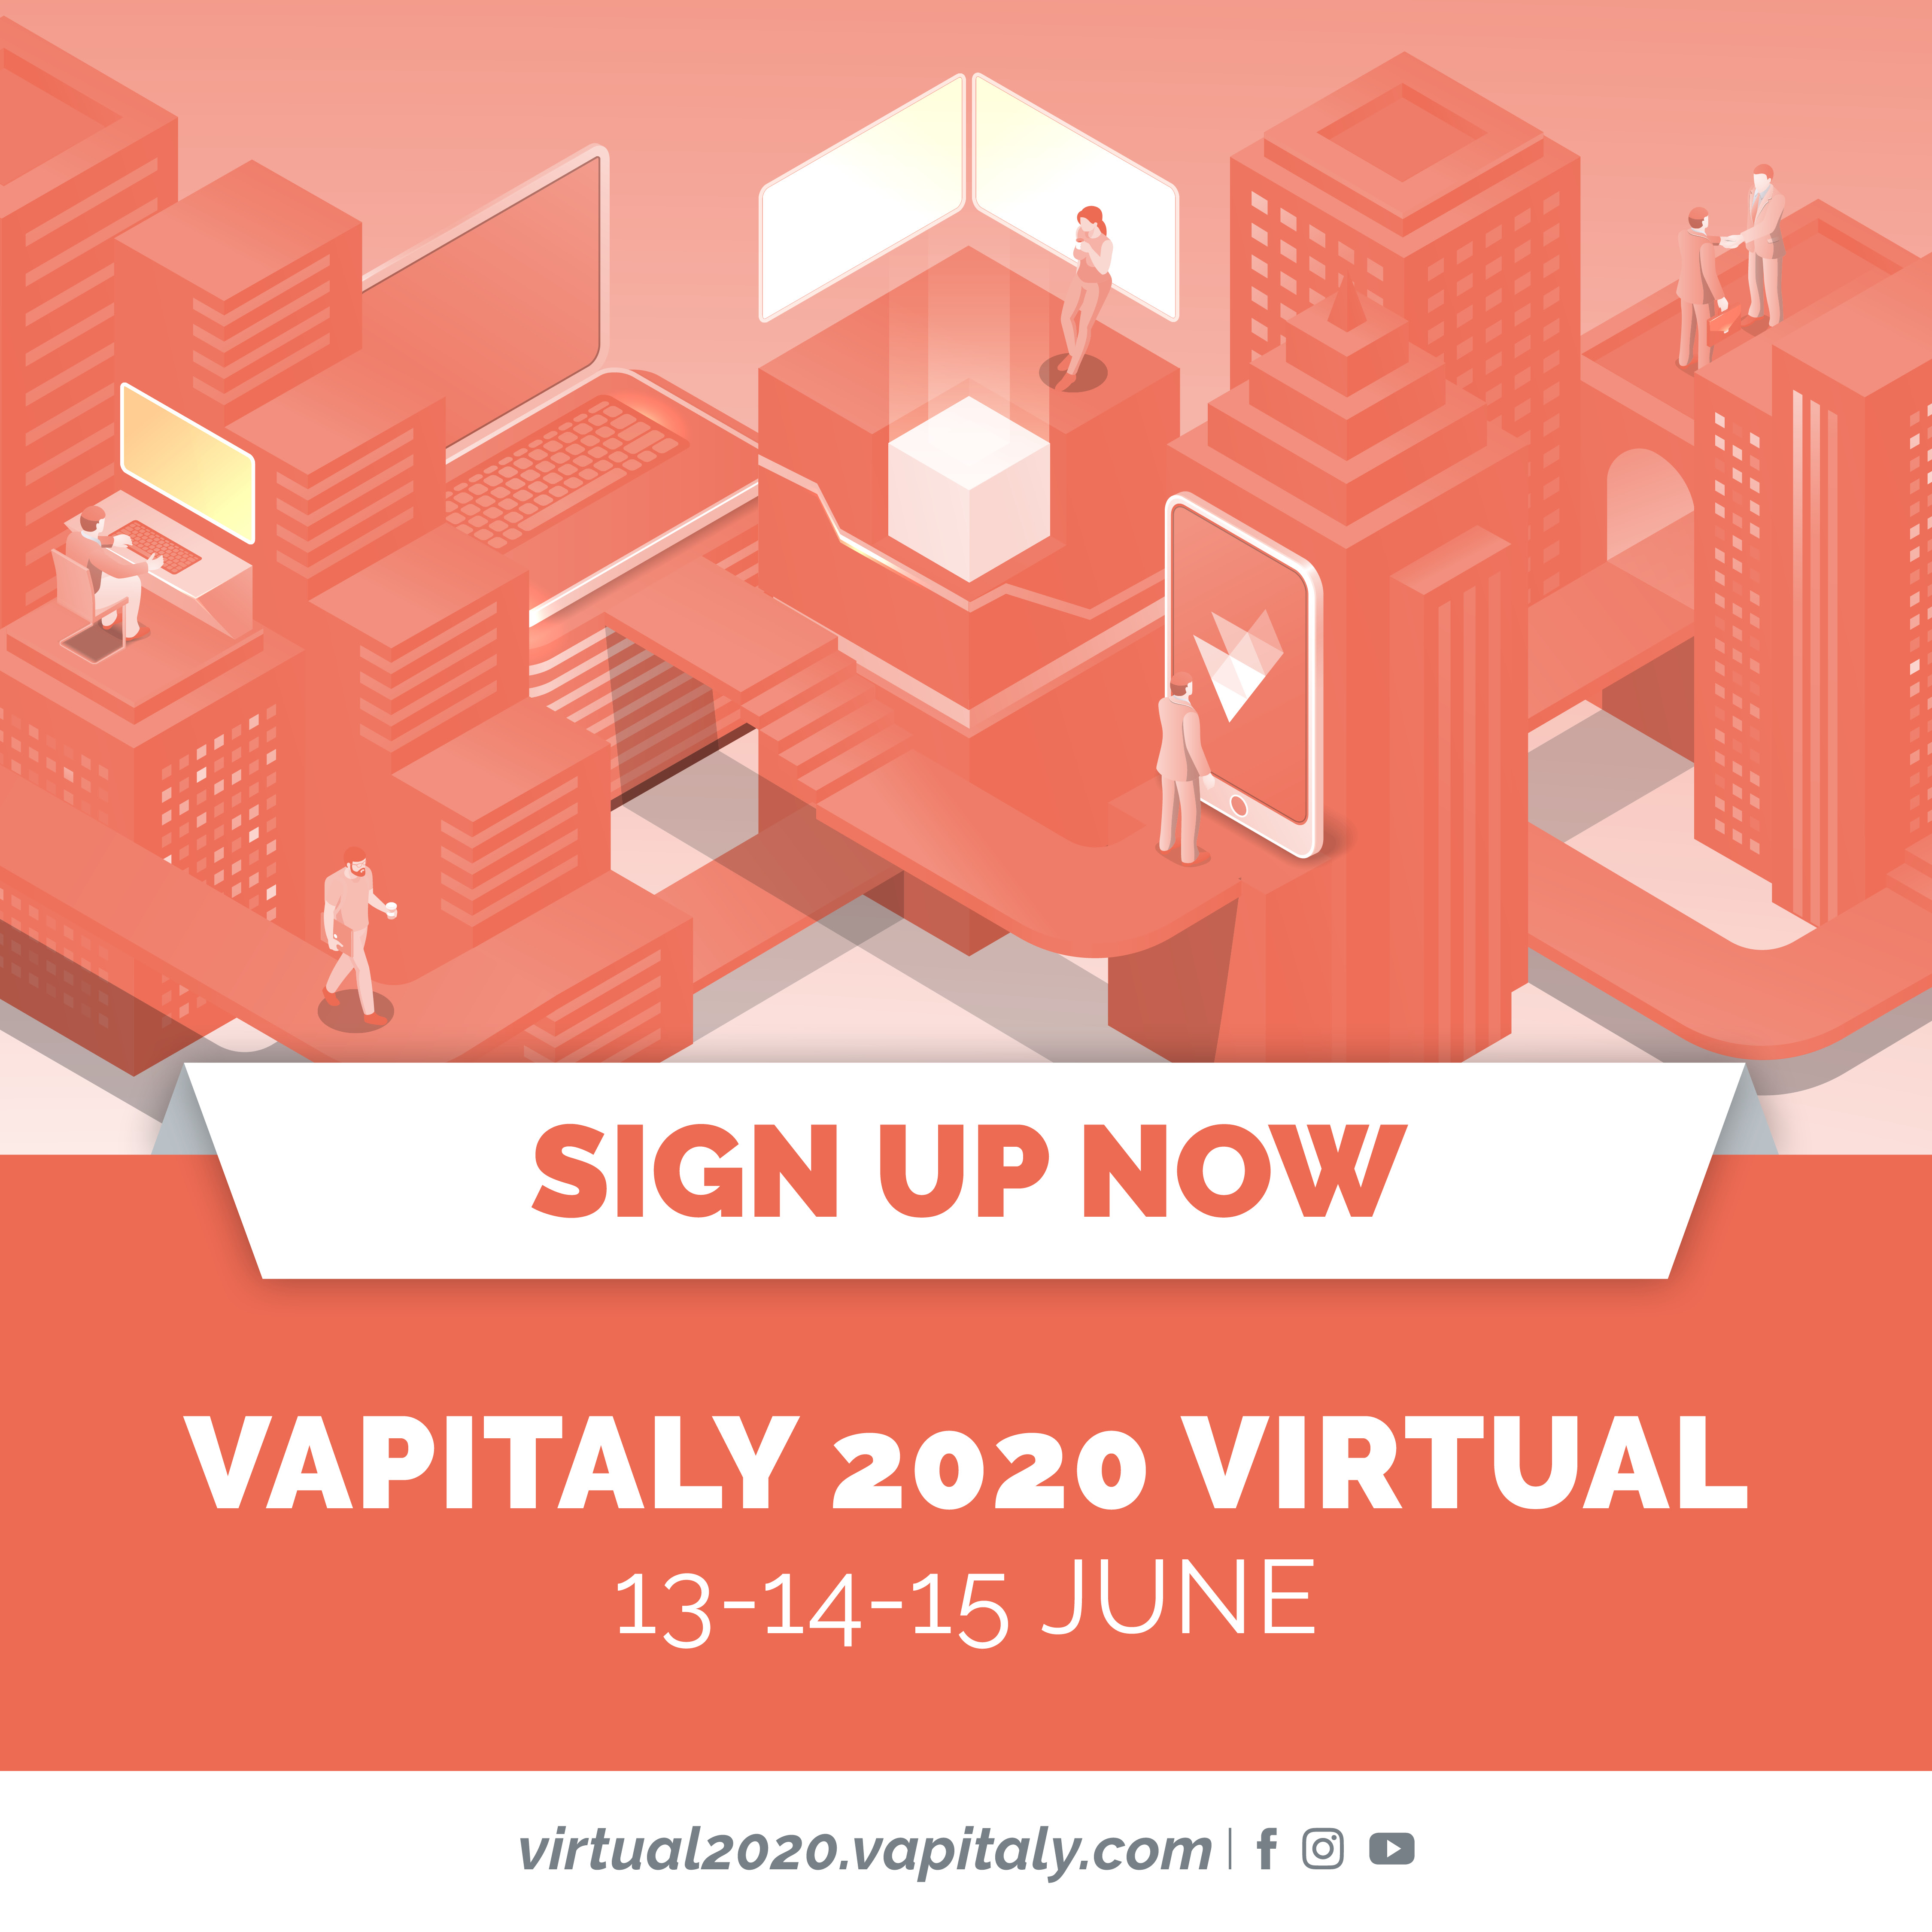 VAPITALY 2020 VIRTUAL Registration open, book your place in the front line